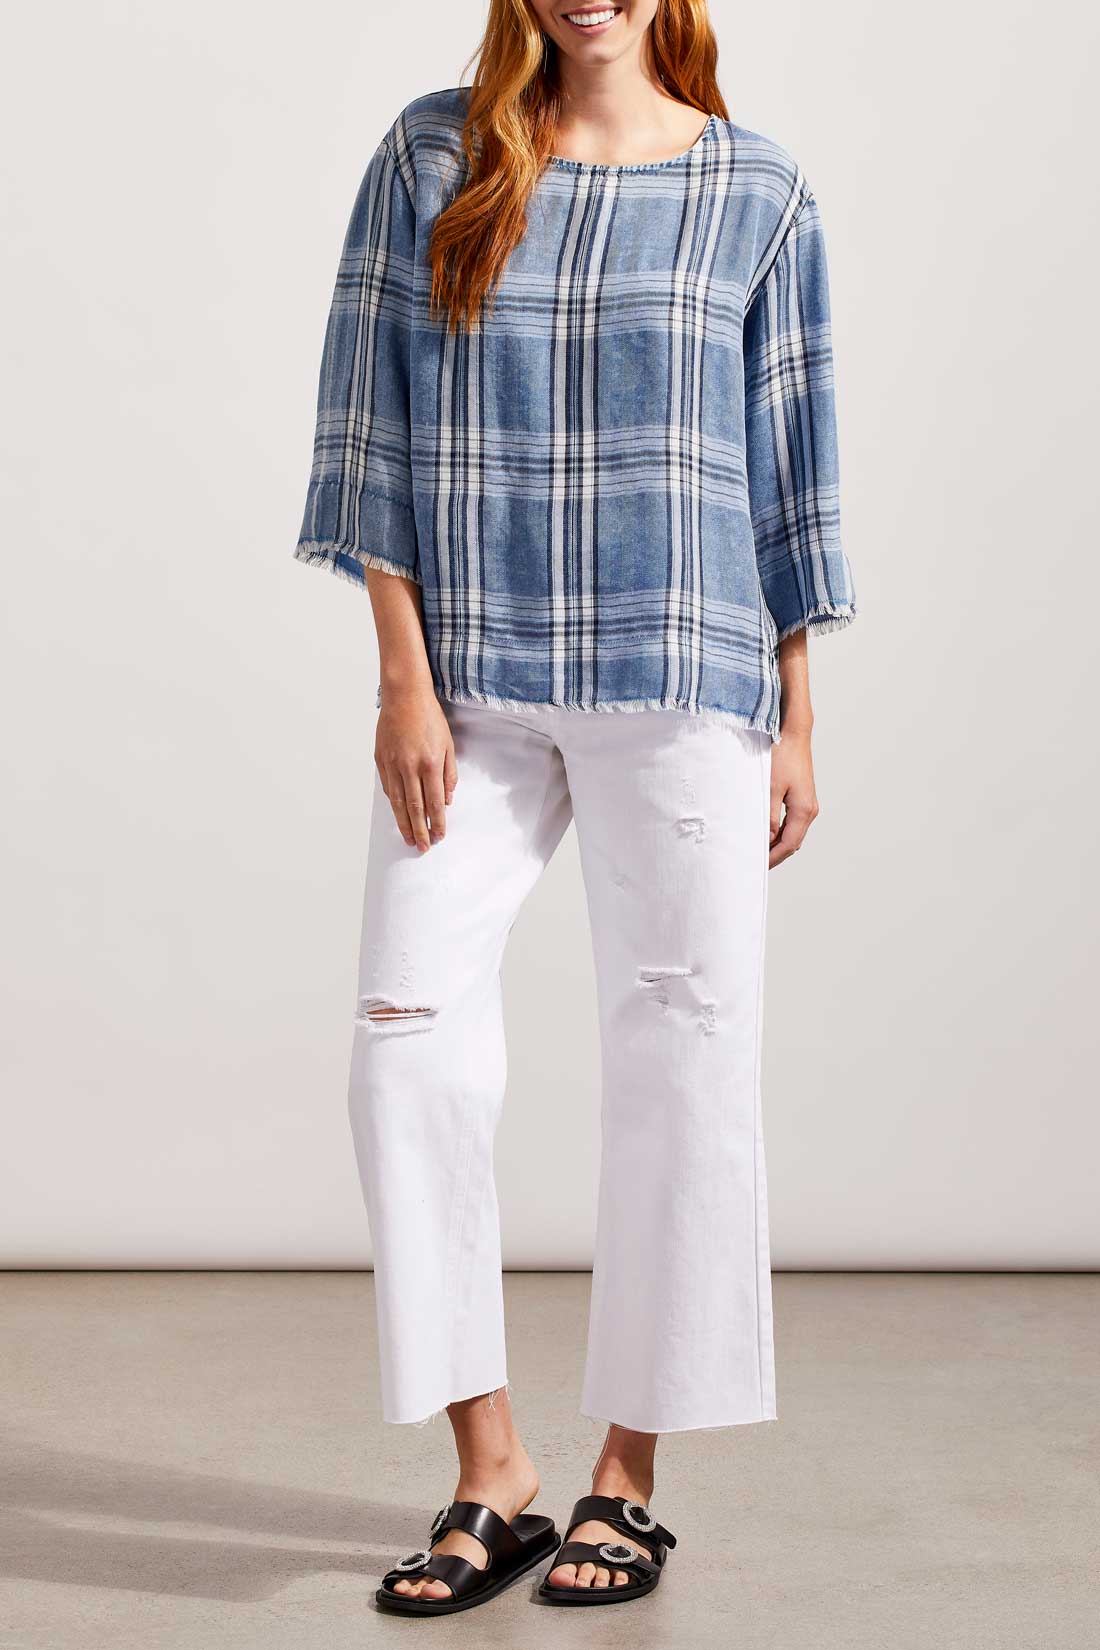 Plaid Bell Sleeve Pop Over Top by Tribal